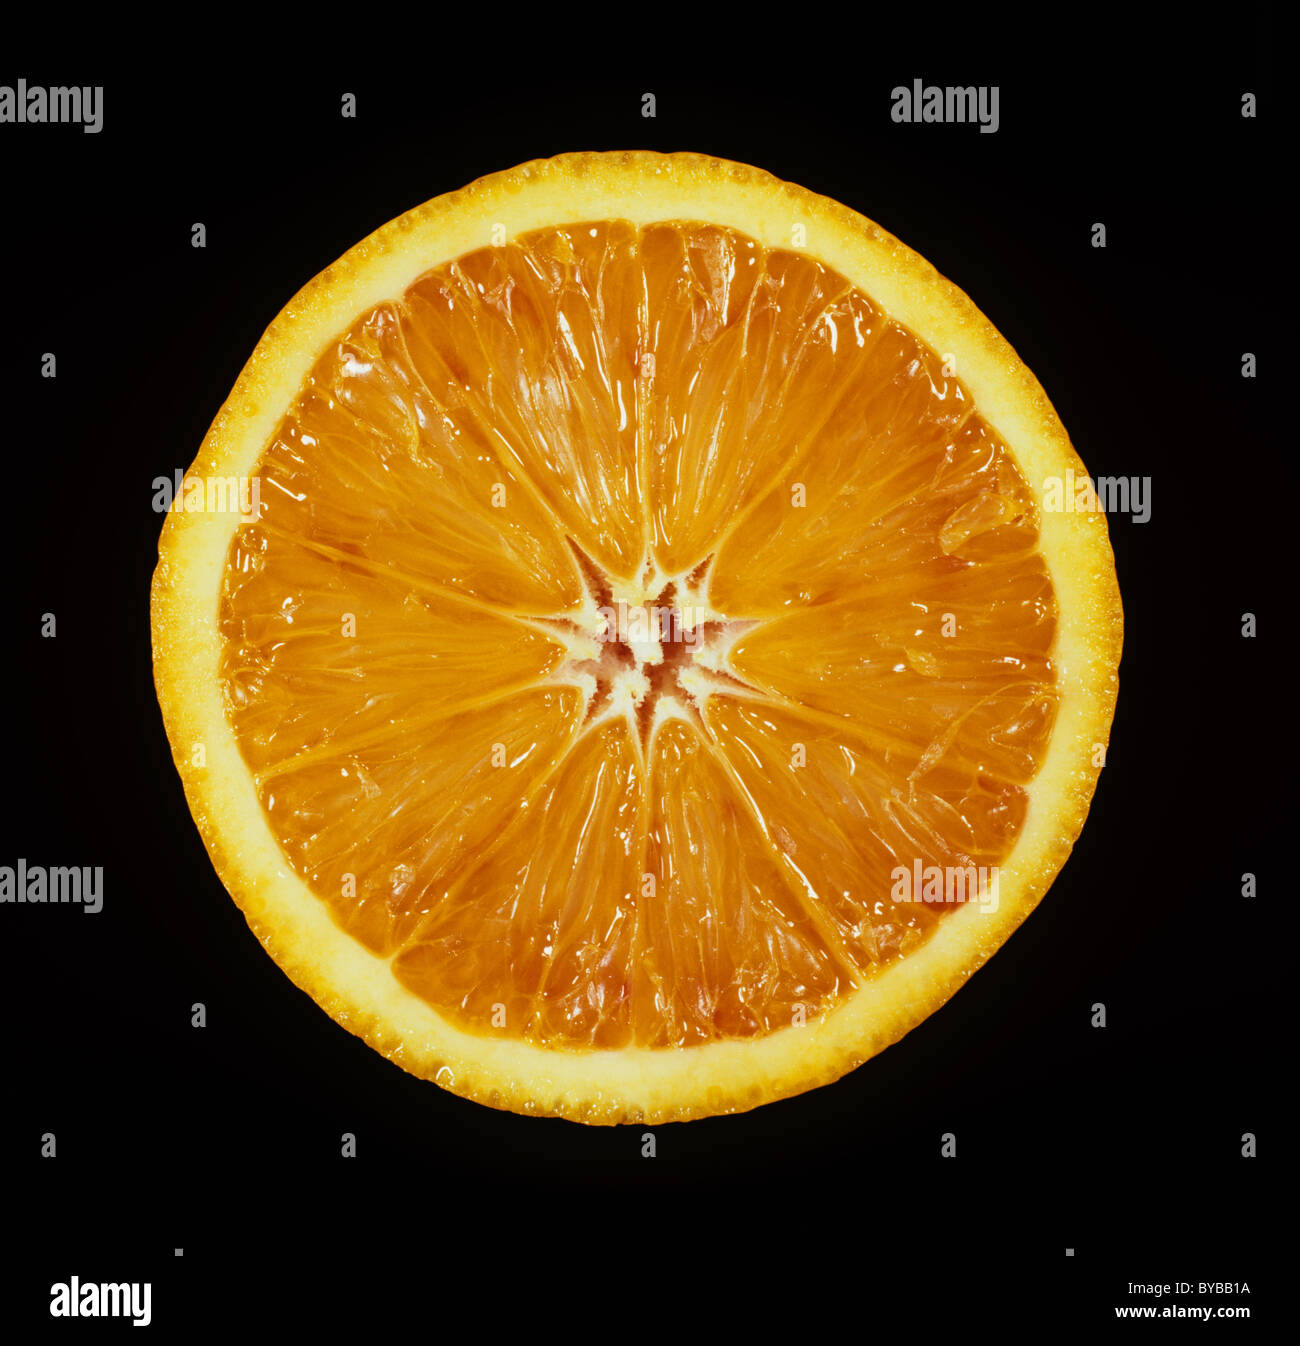 Cut section of an orange fruit variety Maltaise Stock Photo